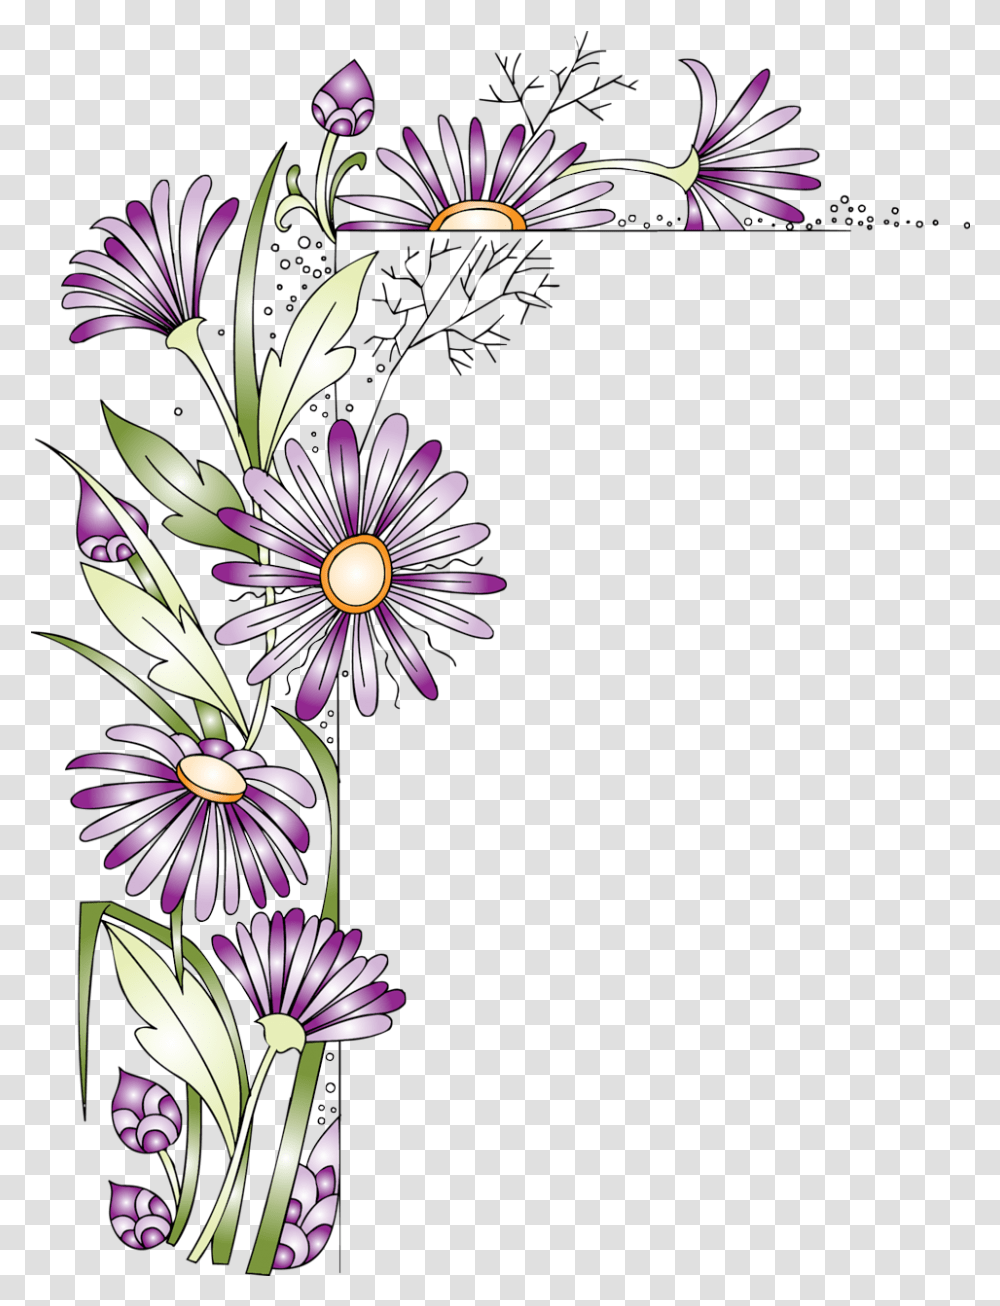 Download Purple Flower Border African Daisy Image With Purple Flower Border, Graphics, Art, Floral Design, Pattern Transparent Png